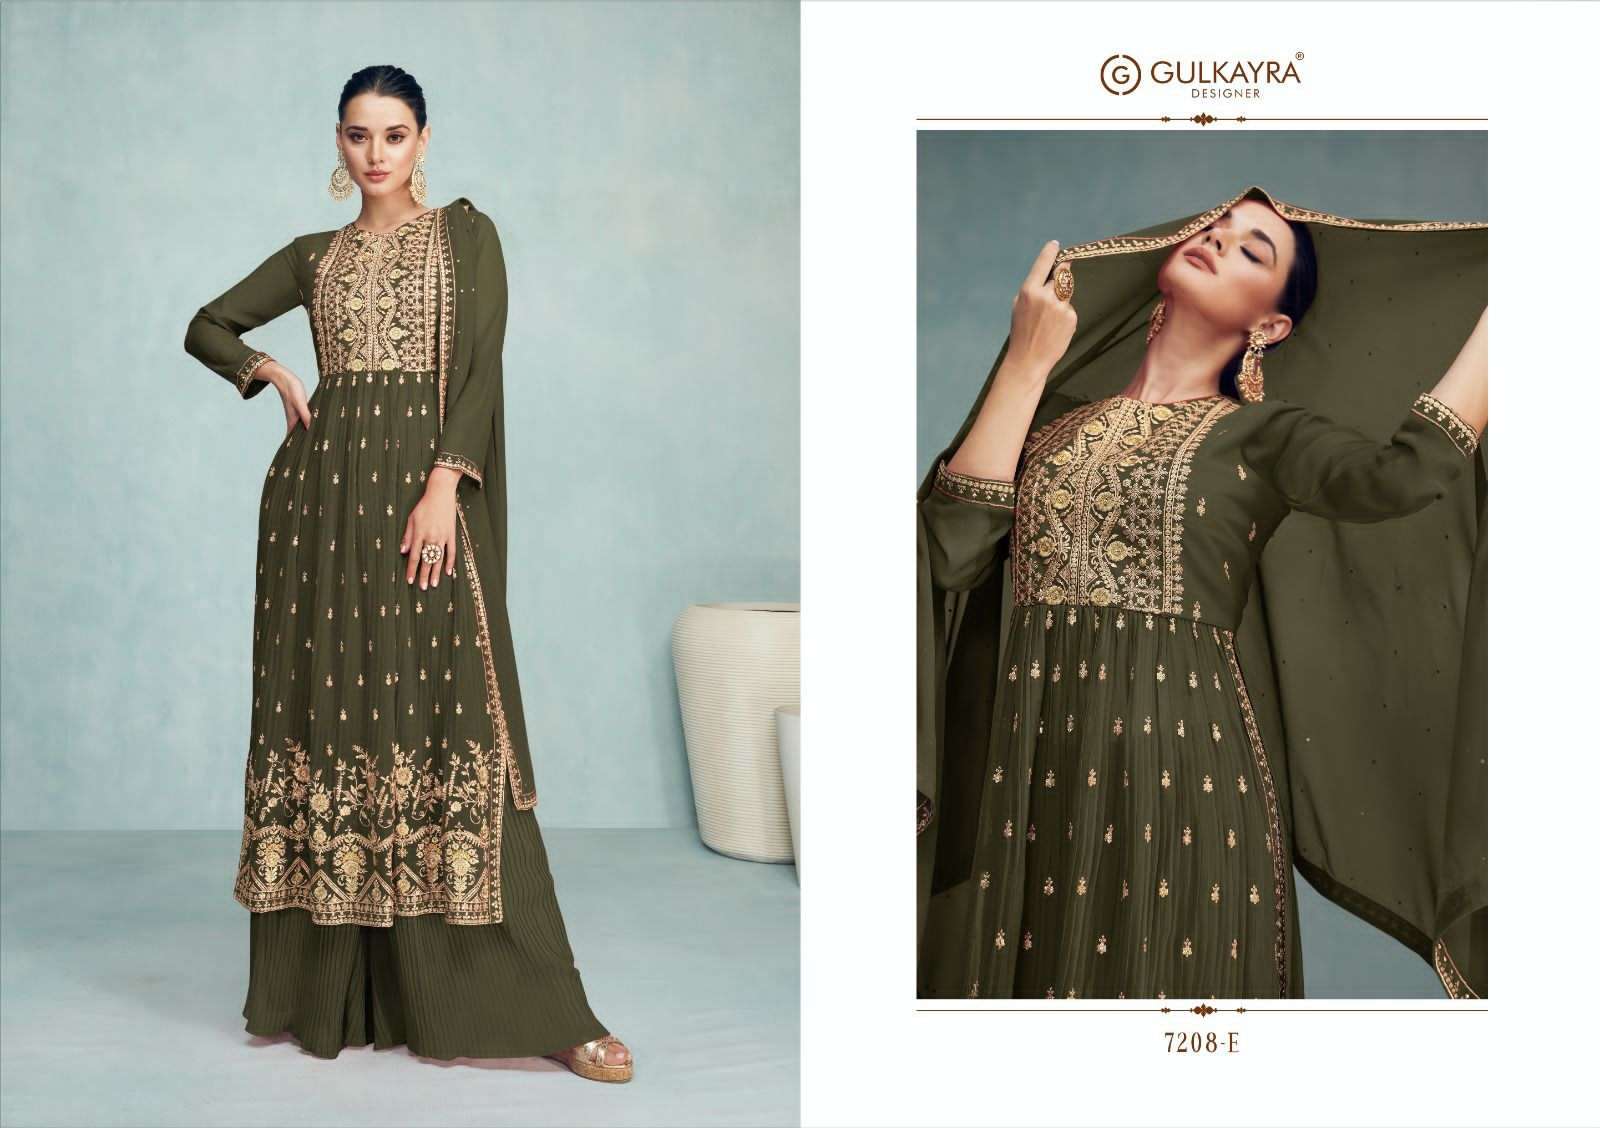 nayra vol 8 by gulkayra designer blooming georgette designer party wear suits latest collection 2023 0 2023 04 06 16 02 57